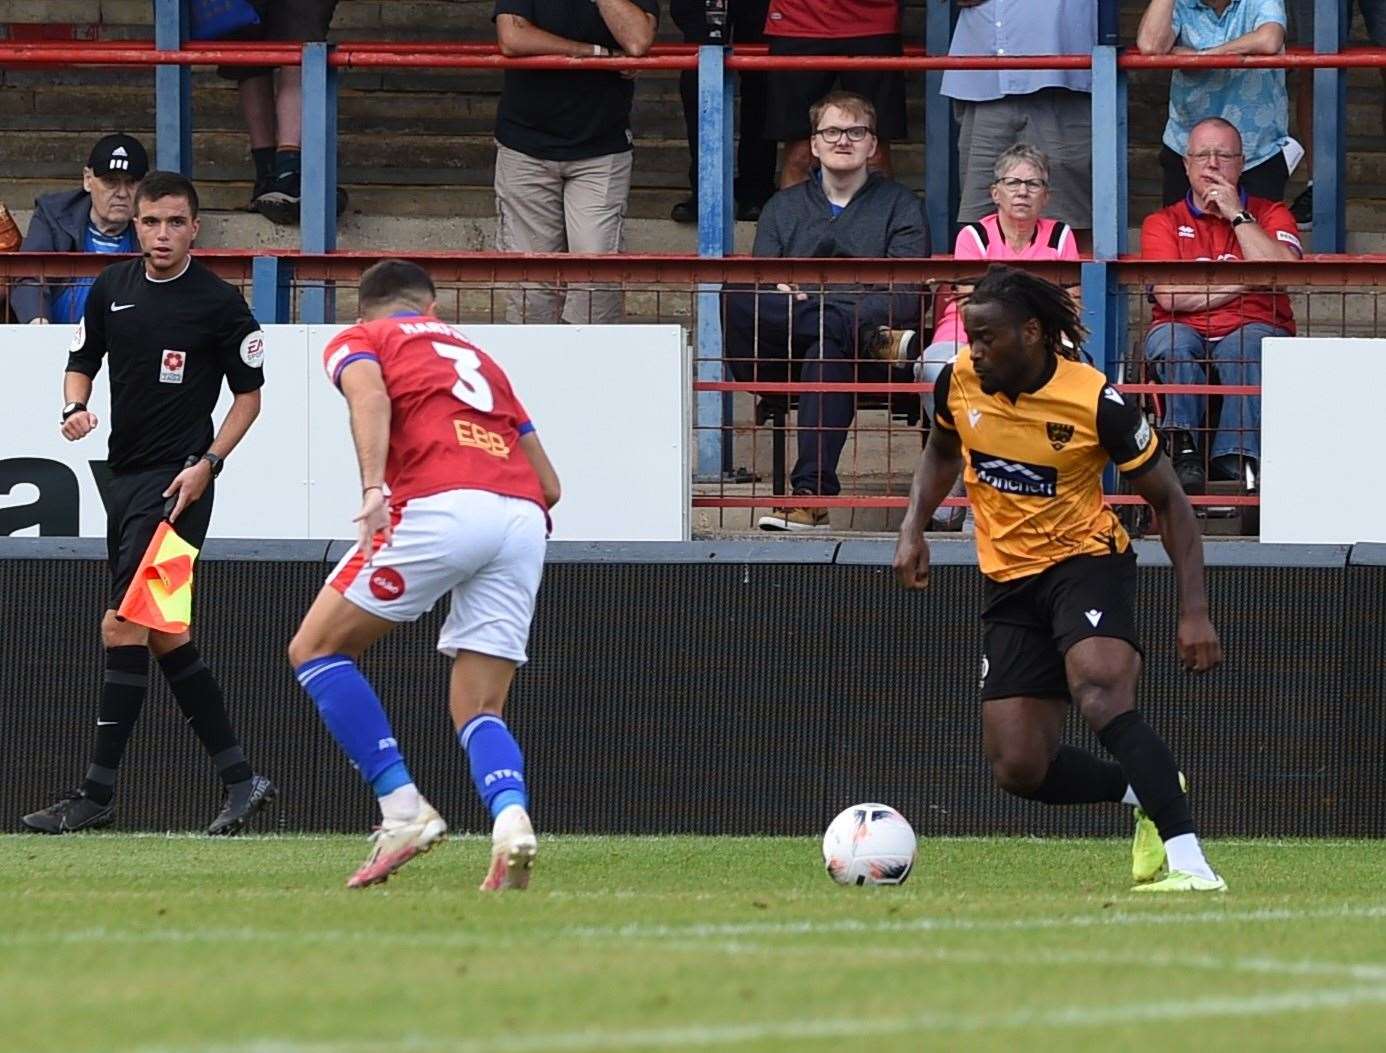 Christie Pattisson sets up Bivesh Gurung's goal at Aldershot - his second assist of the game Picture: Steve Terrell